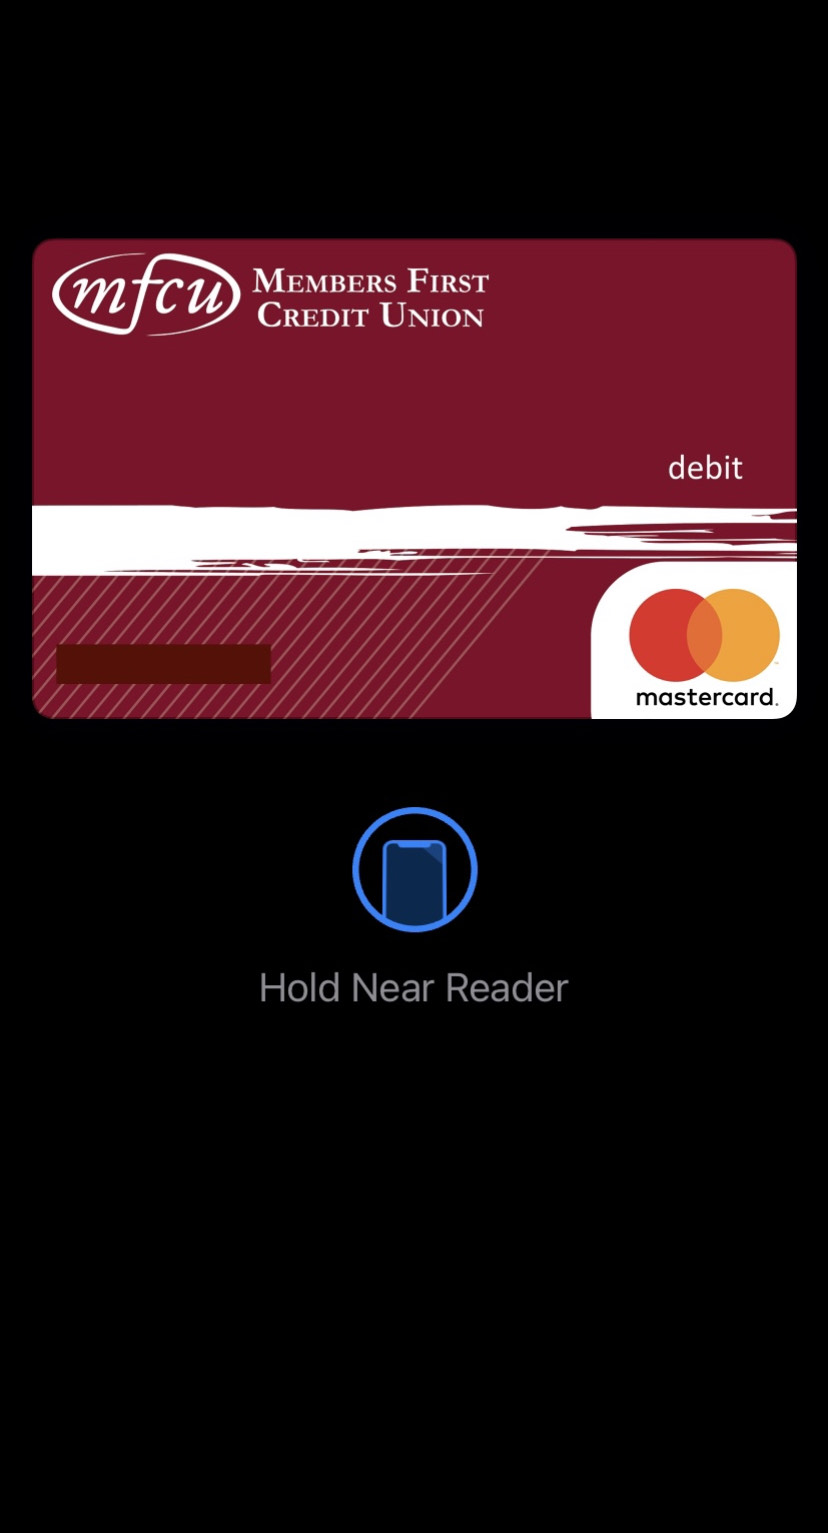 Image of an MFCU Card in a digital wallet